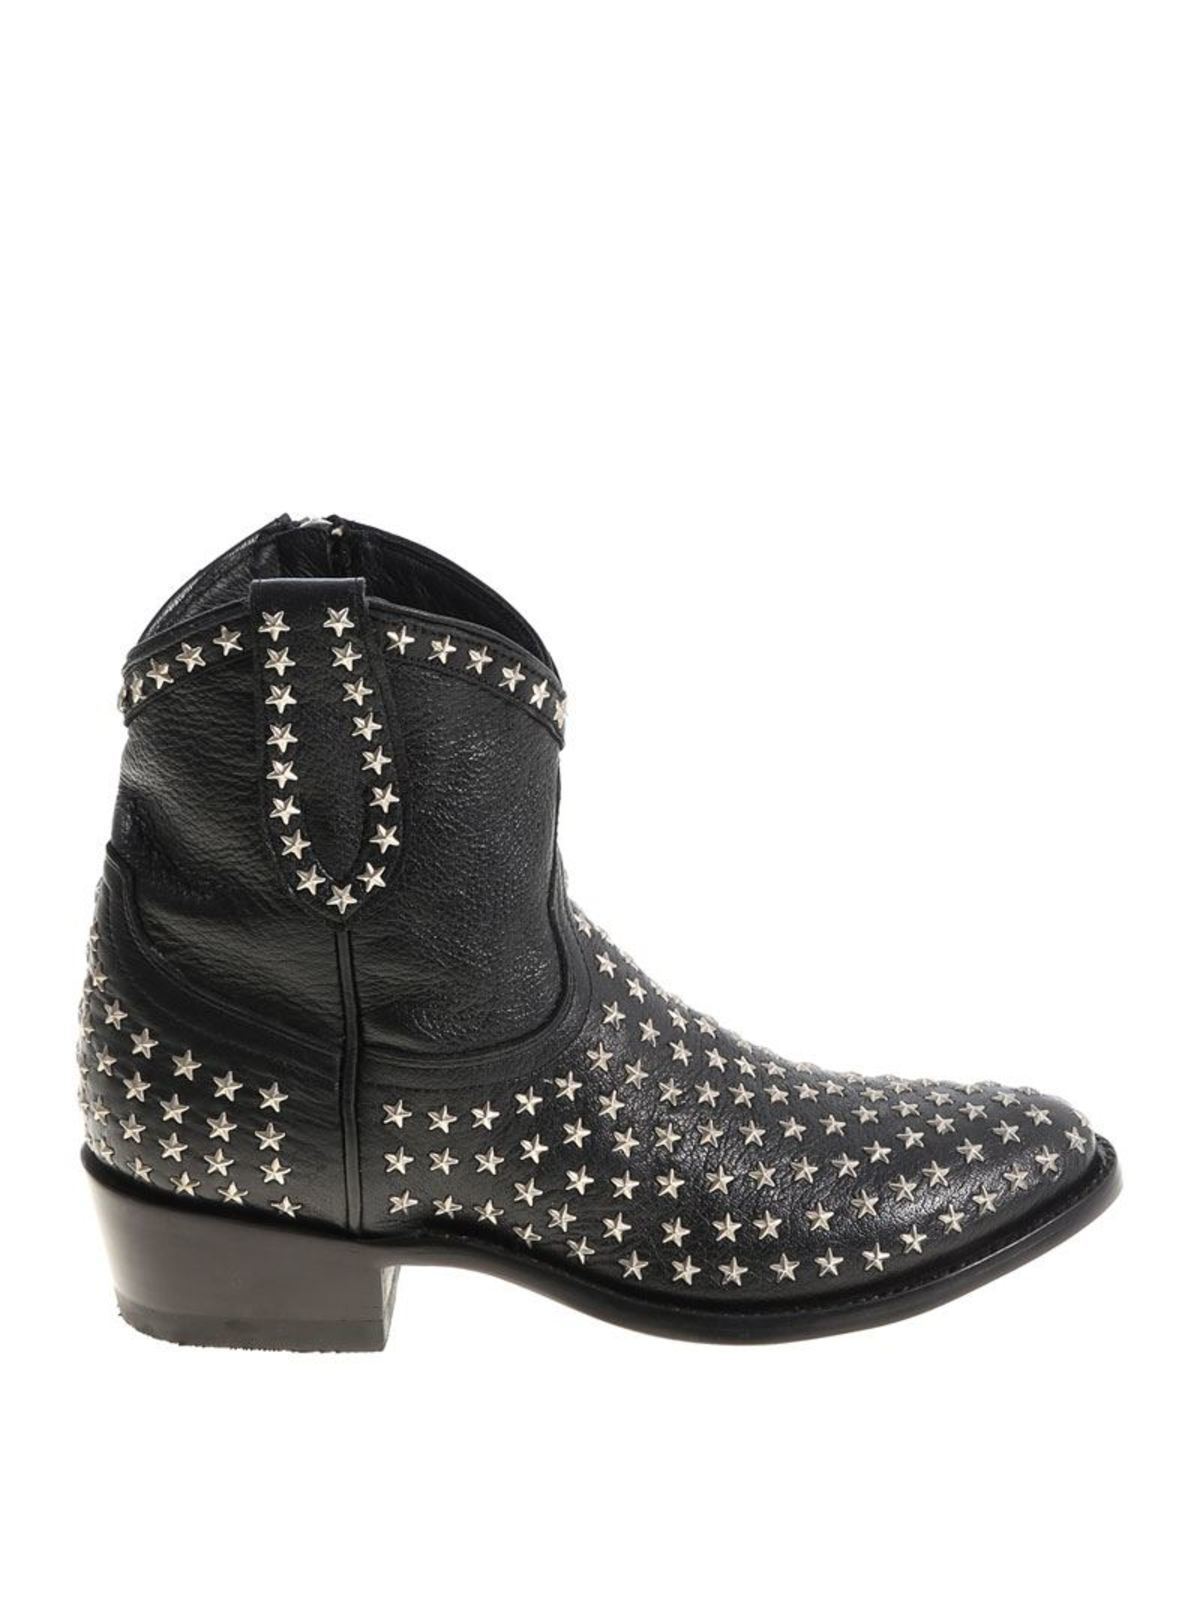 Boots Mexicana - Black Mexican ankle boots with metal stars - L25631